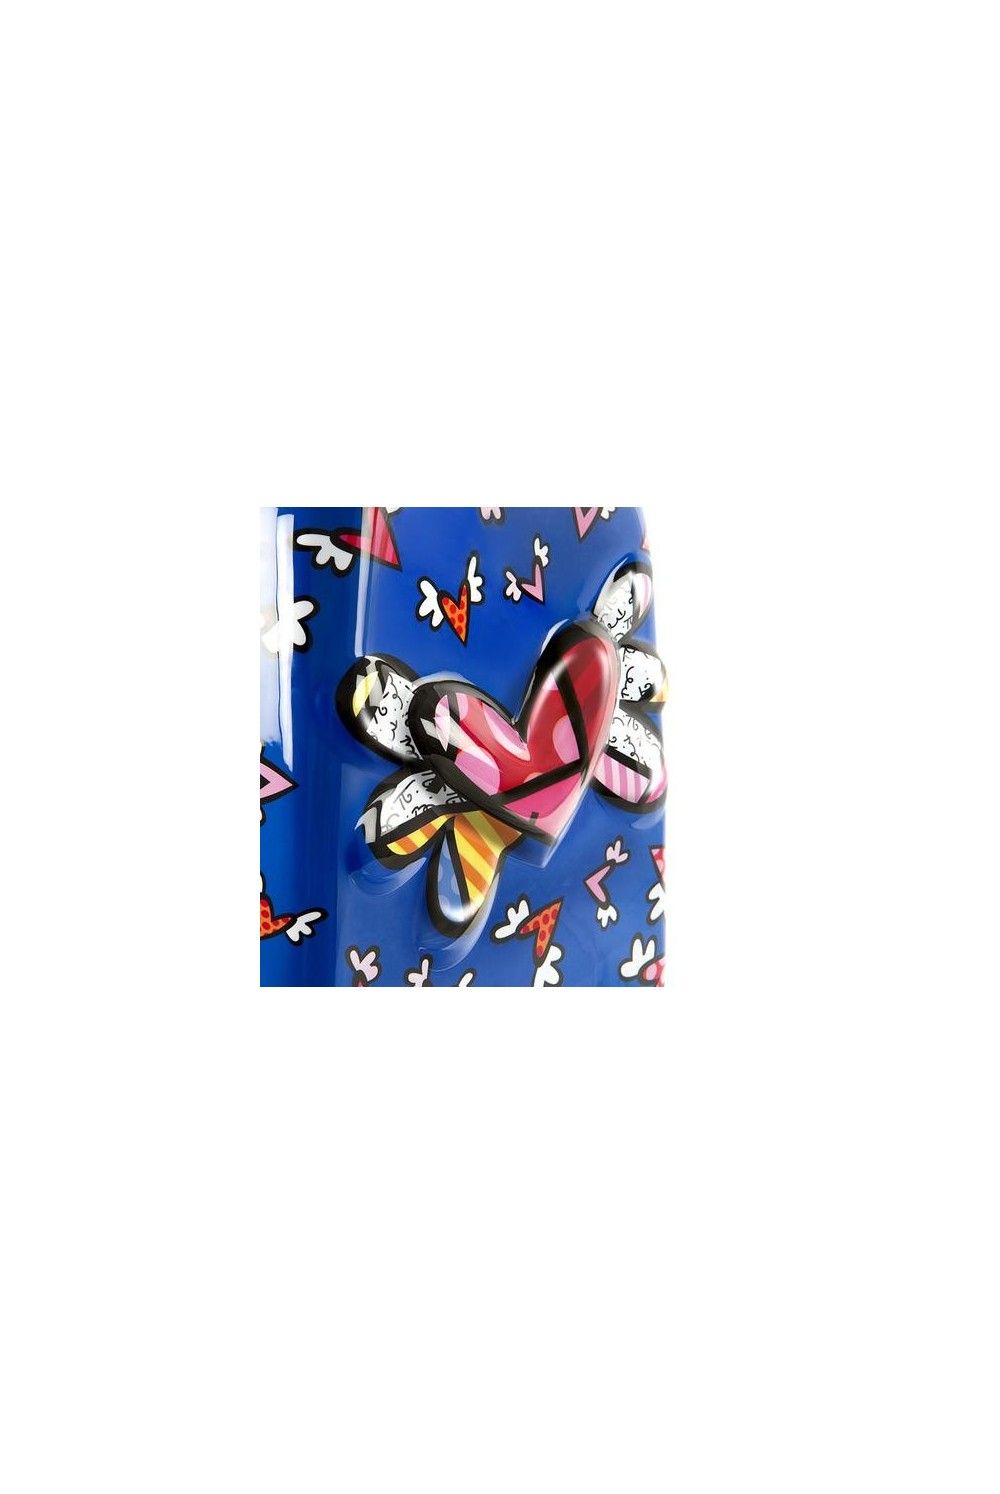 Heys Britto Tween 3D Spinner Flying Hearts 51 cm 4 roues bagage à main